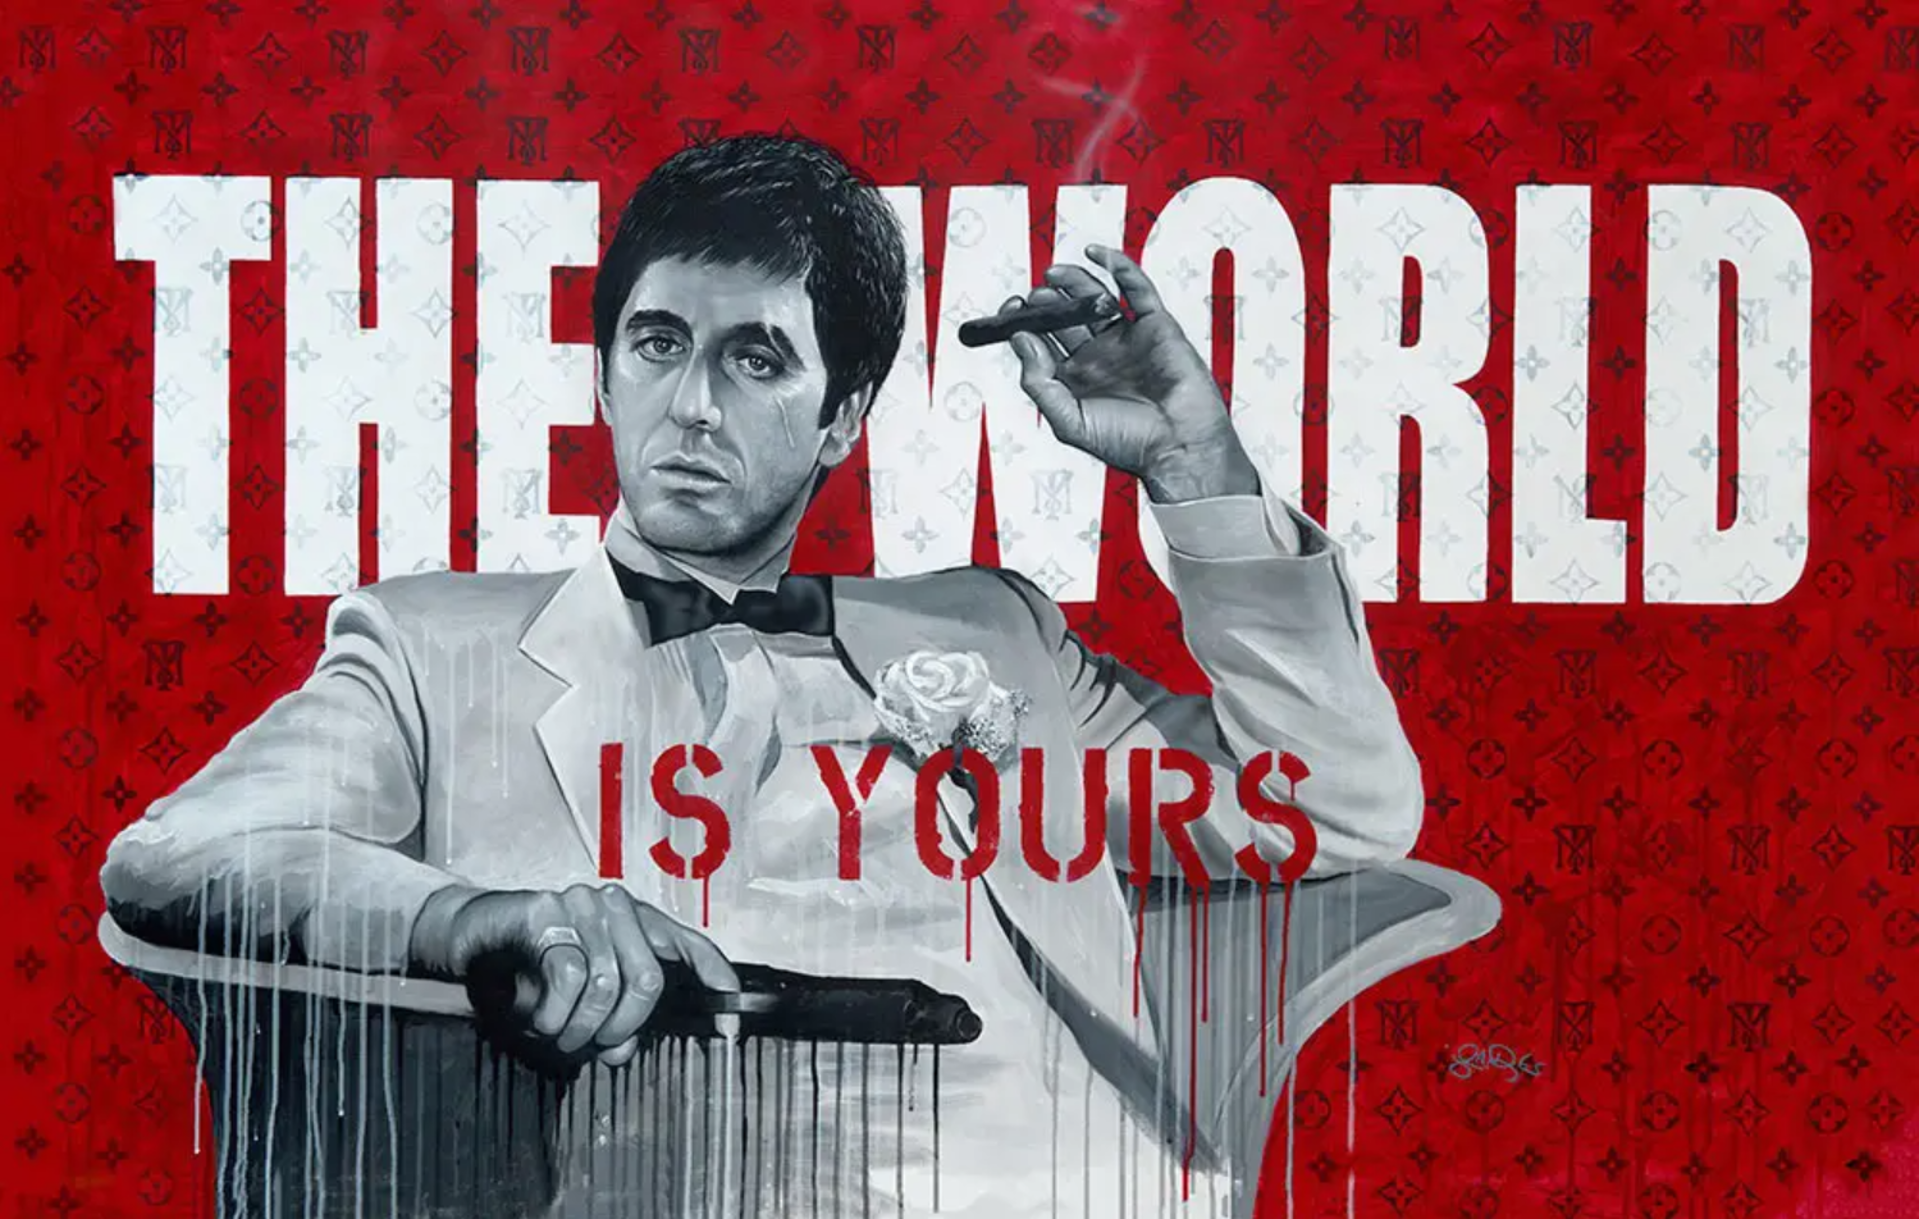 "The World is Yours" Scarface by John Douglas